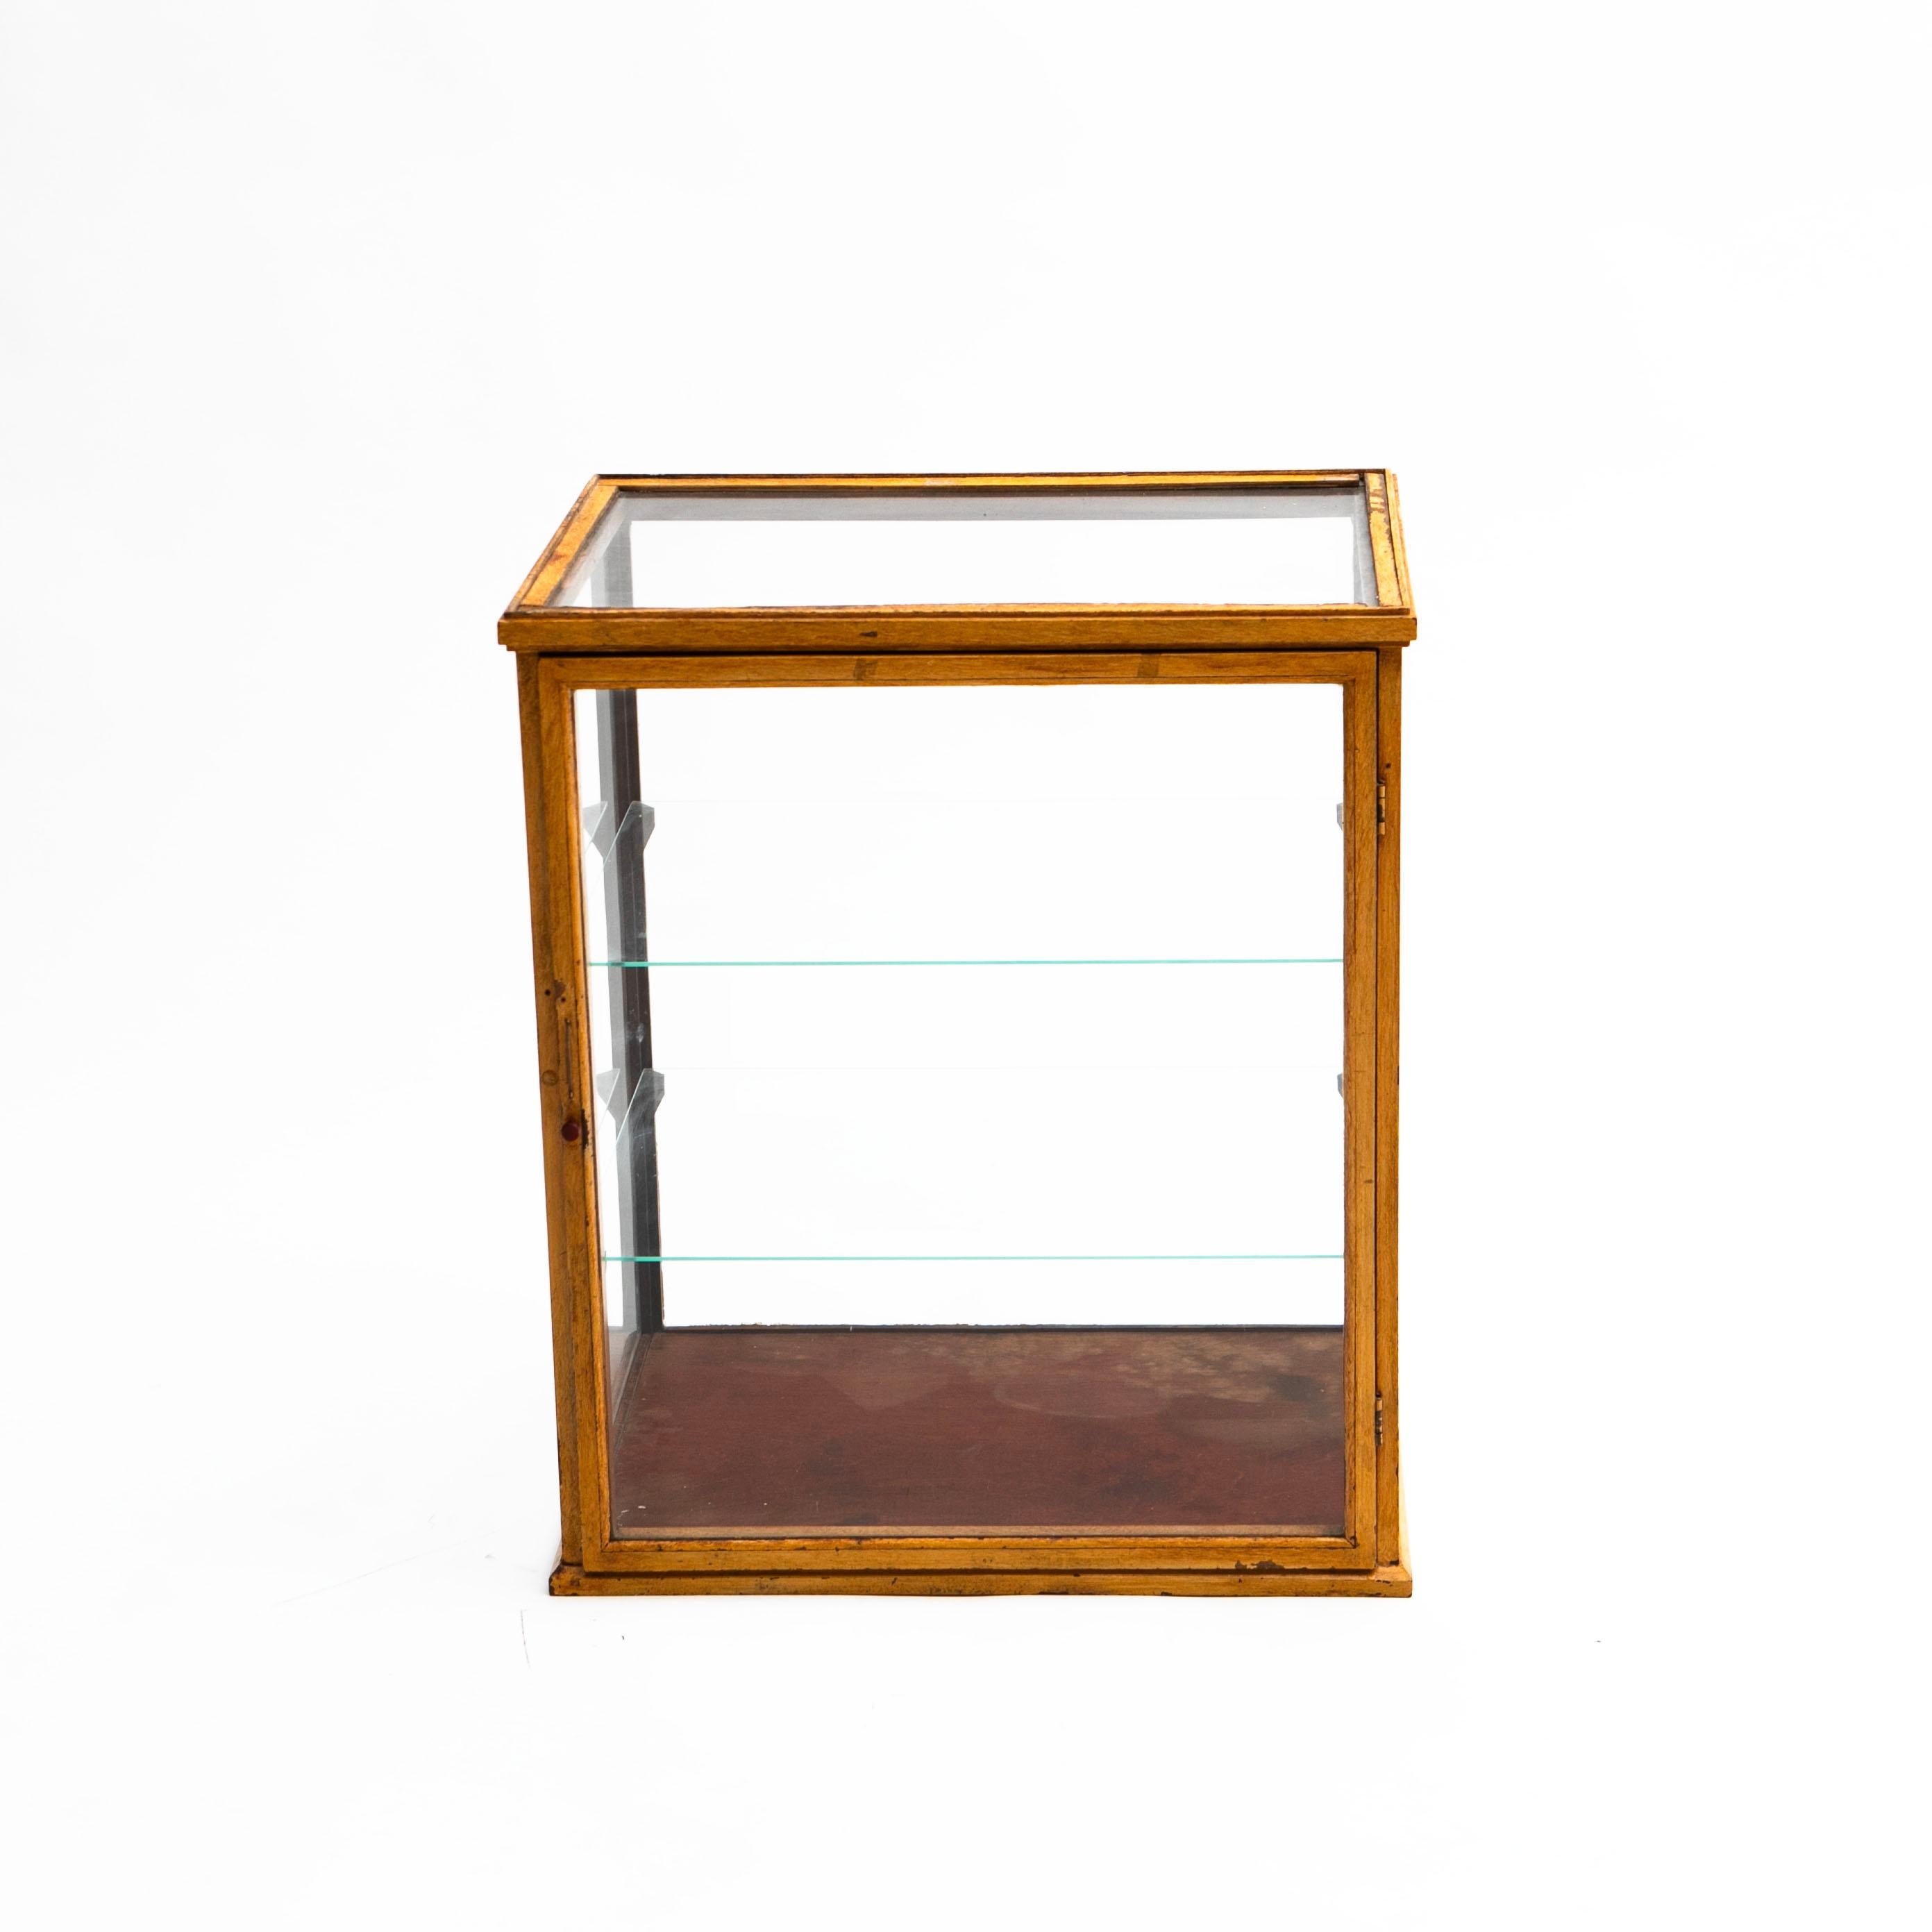 Other Table Showcase / Display Cabinet - In Pine. Original Yellow Paint For Sale